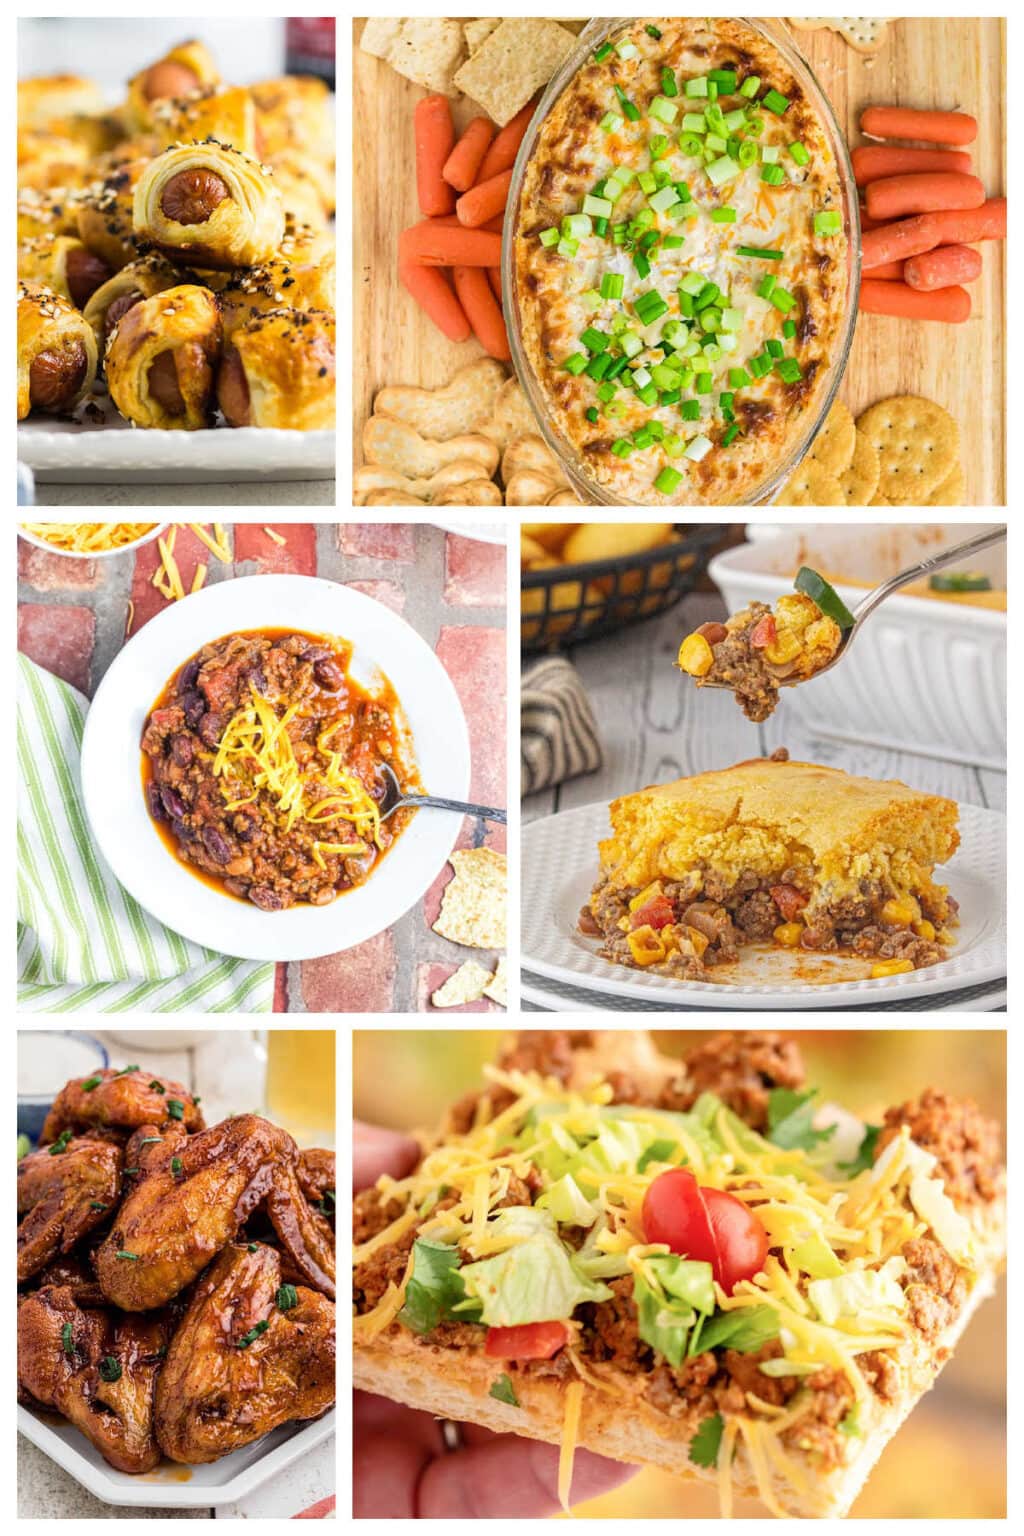 65 Super Bowl Tailgating Recipes (Best Party Ever ) - Restless Chipotle